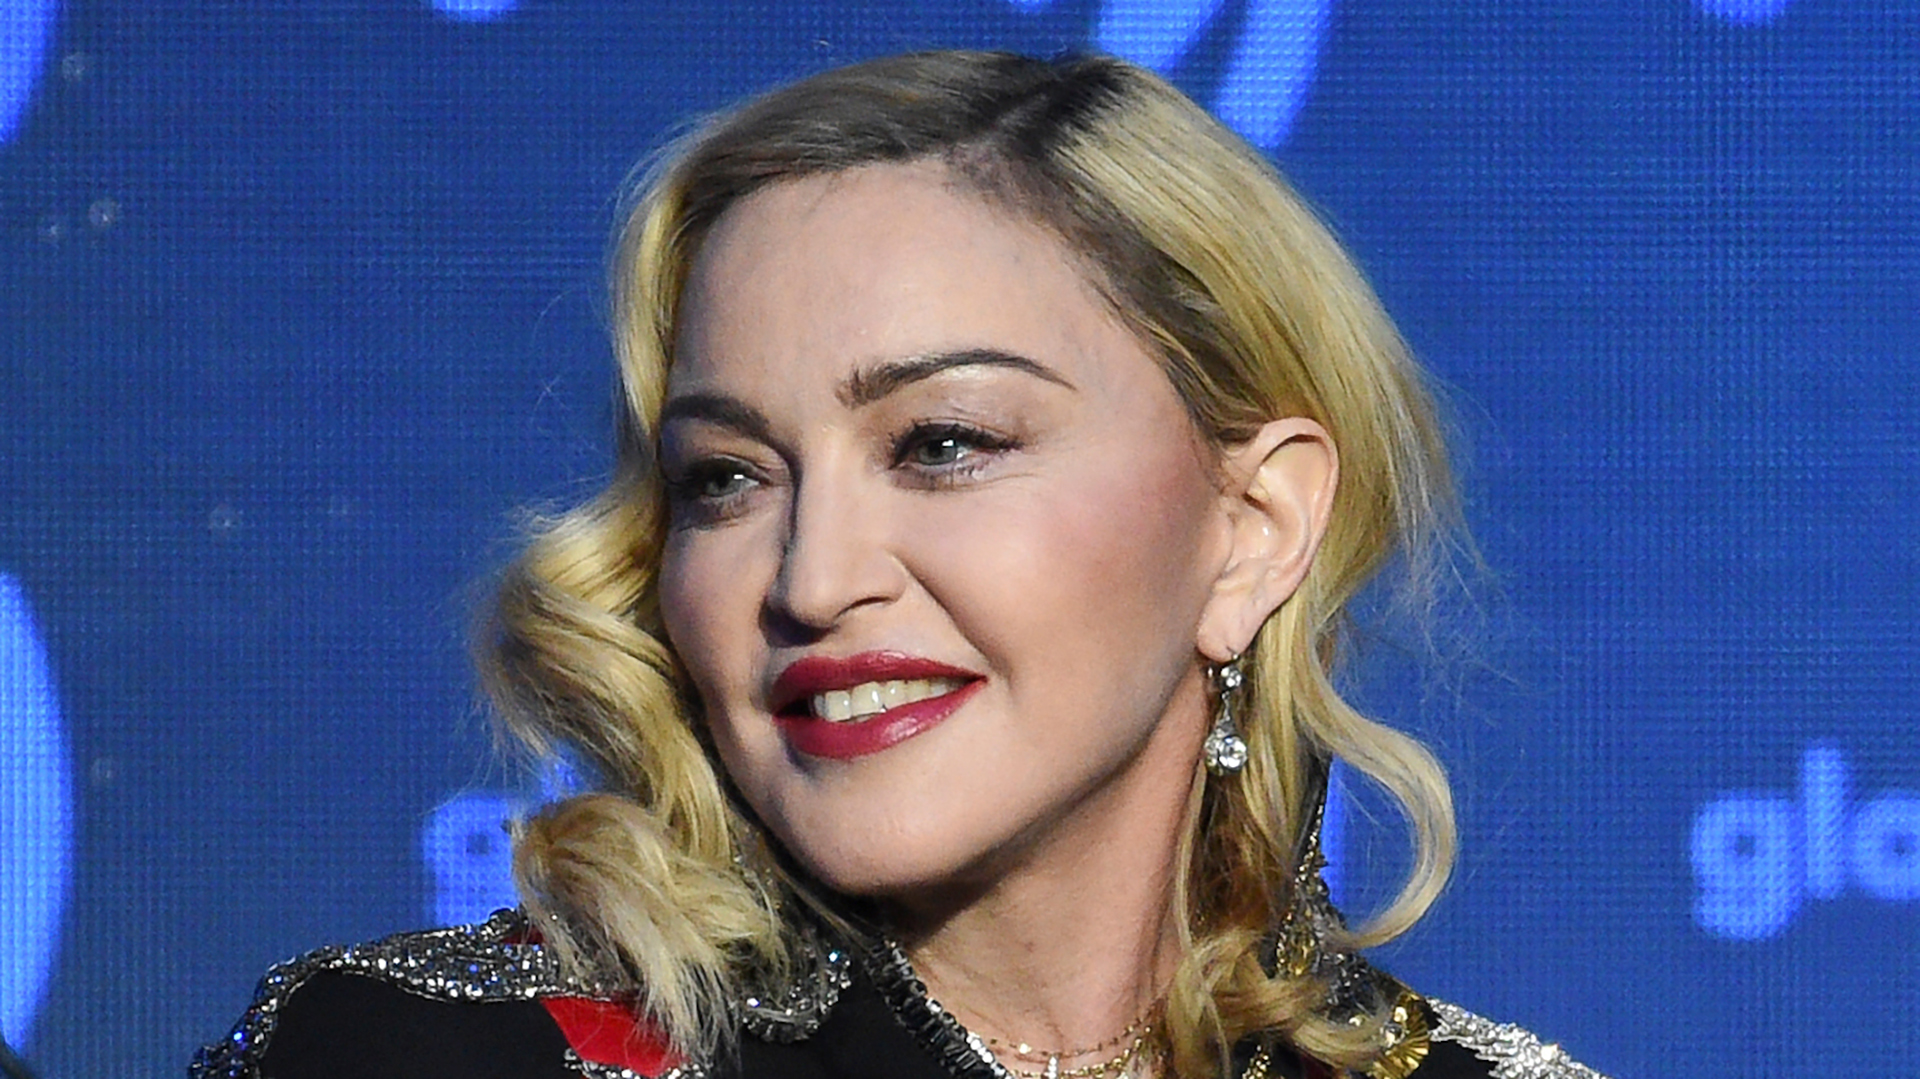 Madonna's Madison Square Garden shows have been rescheduled to January, and Barclays Center gigs are now in December